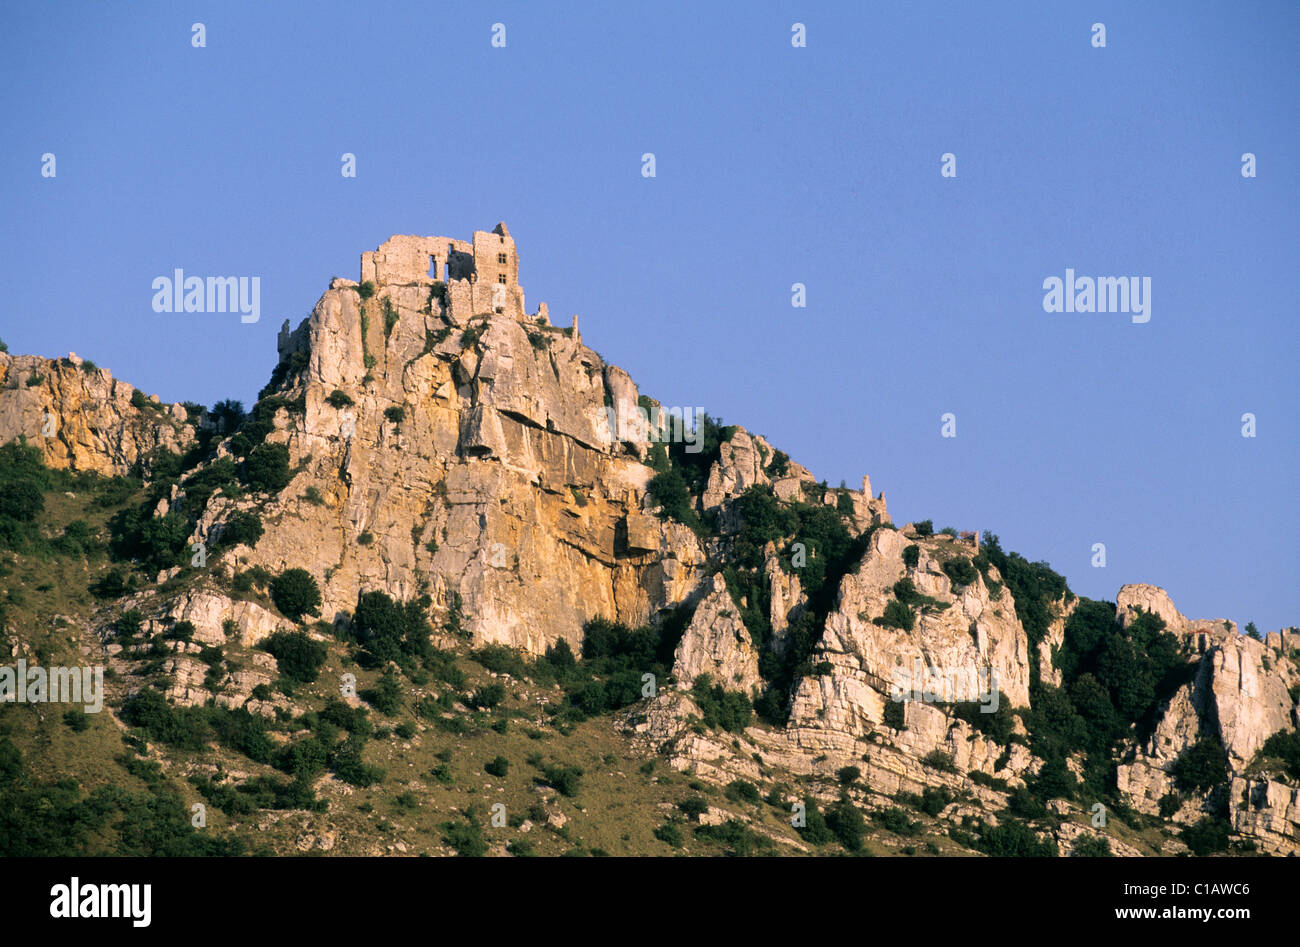 France, Ardeche, ruins of the Crussol castle in the middlle Rhone valley Stock Photo